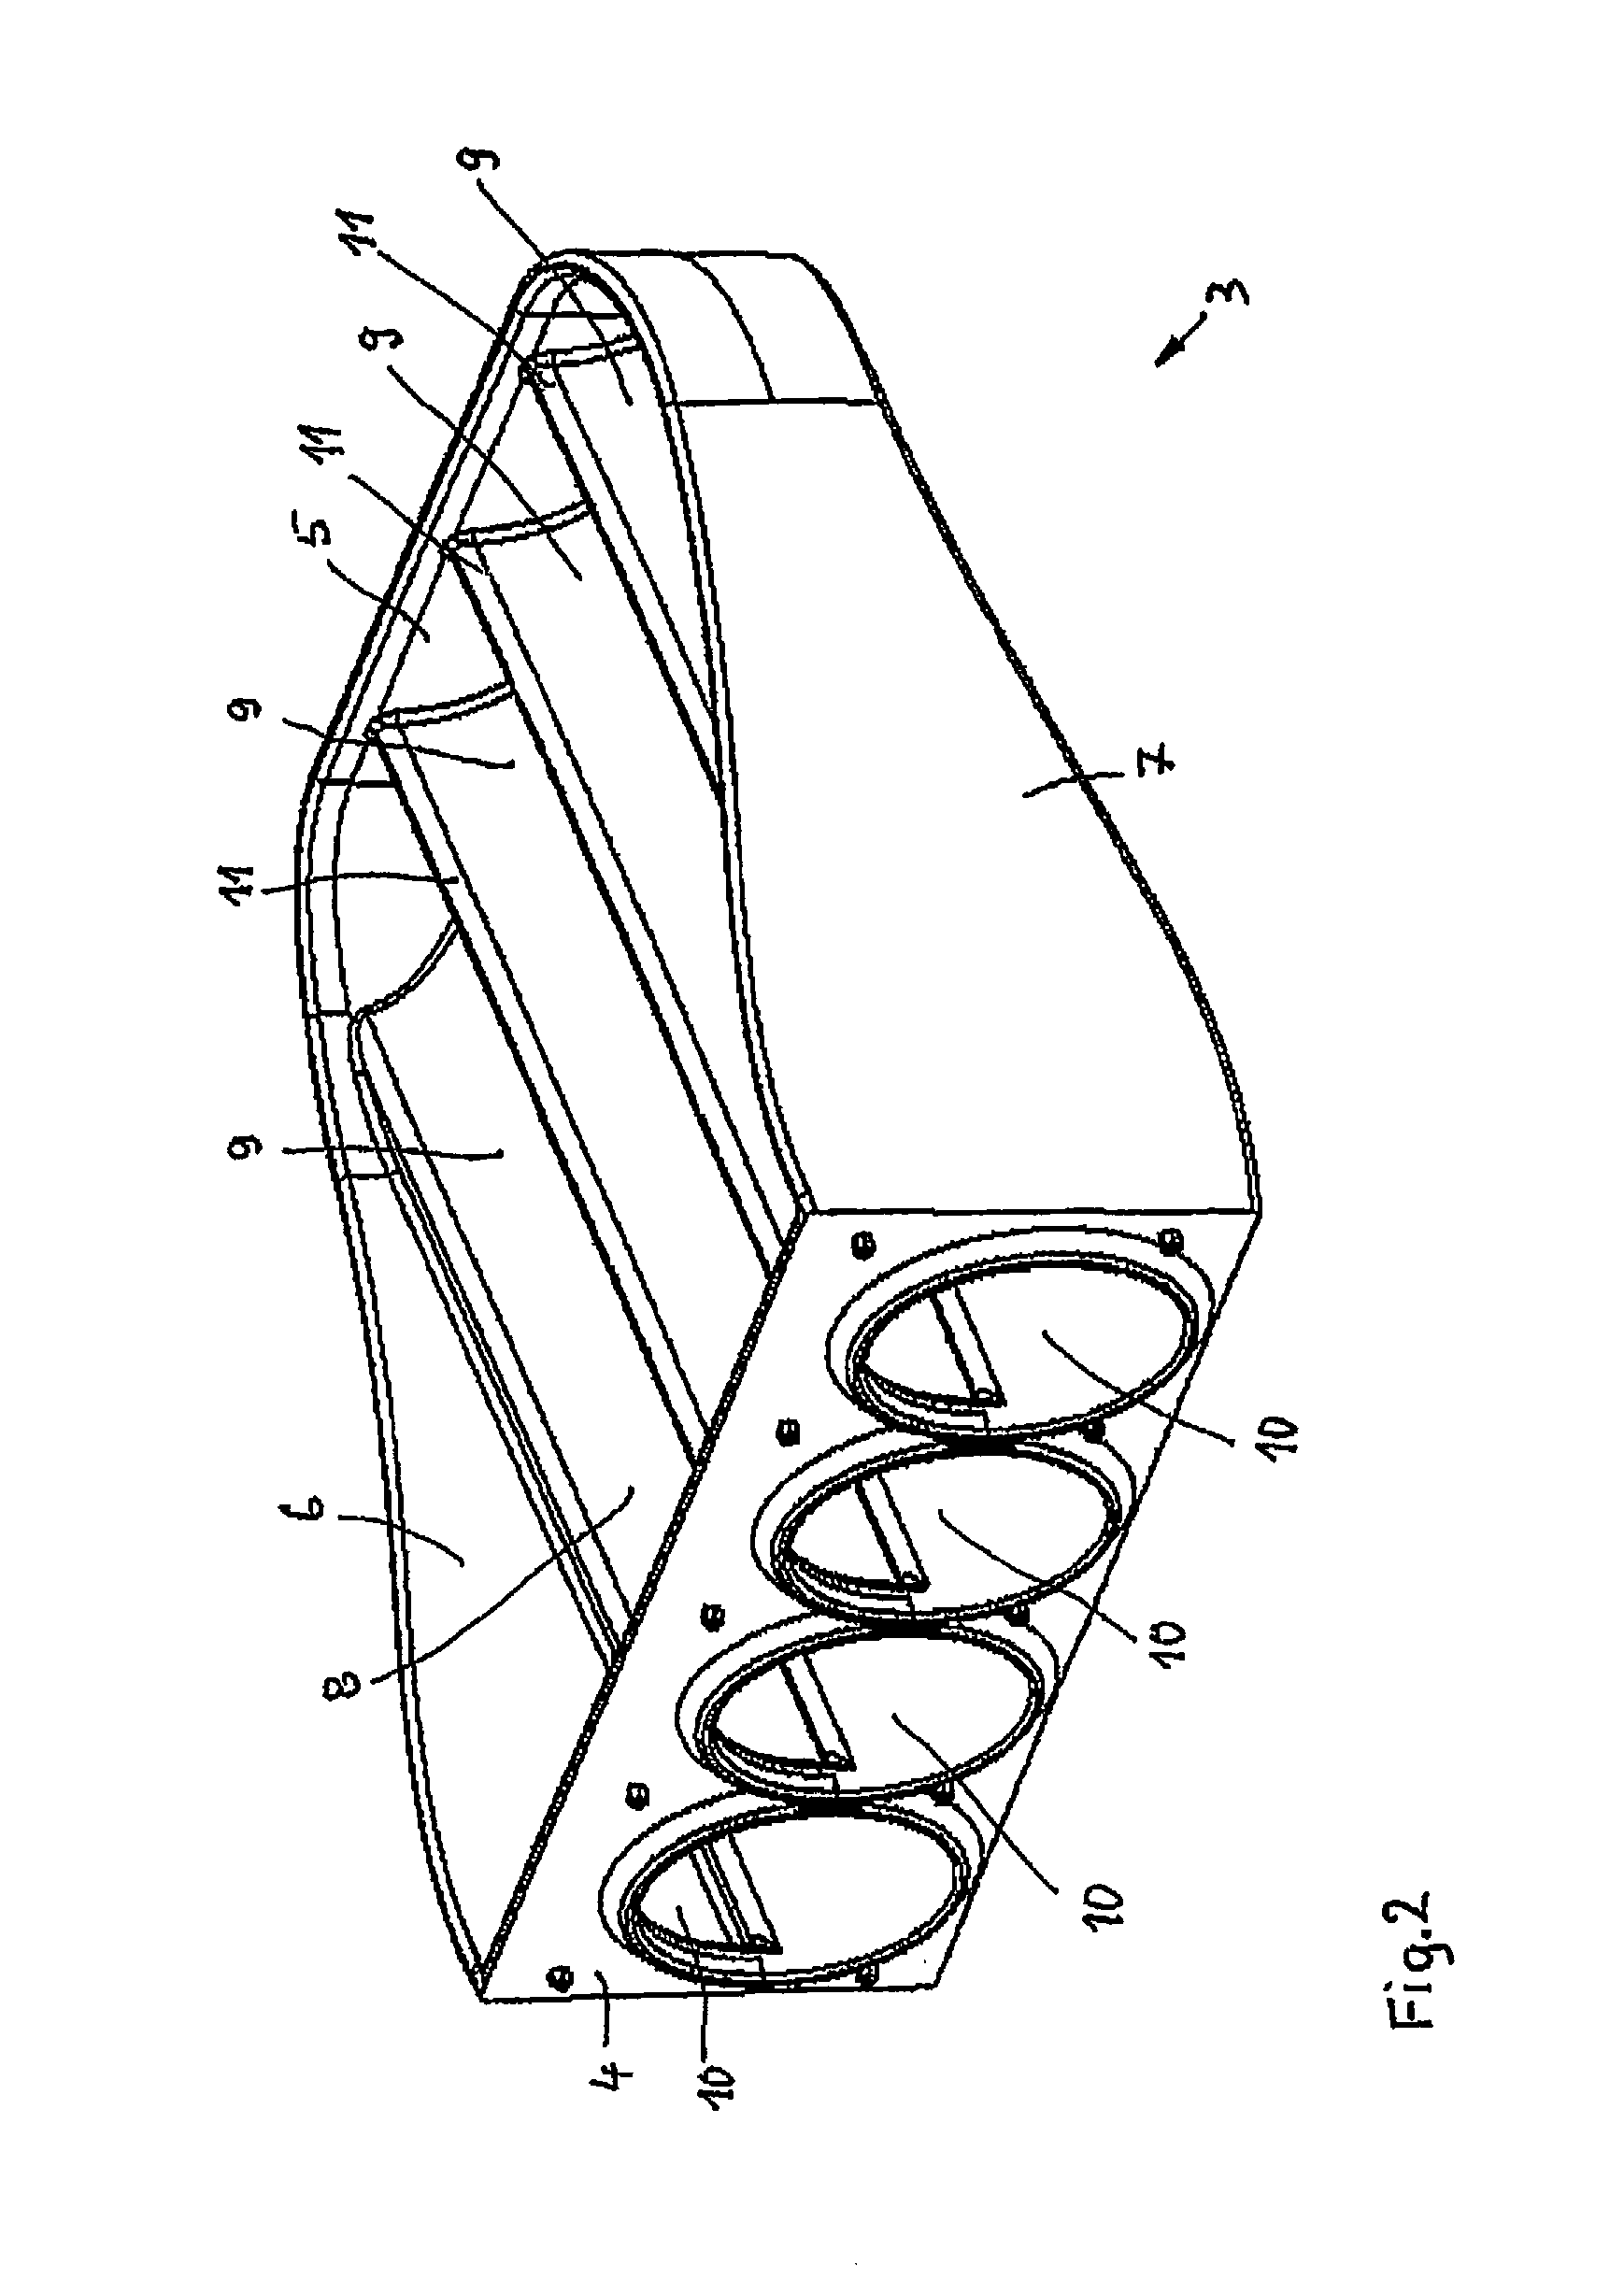 Device for taking back empty containers, in particular plastic bottles and metal cans